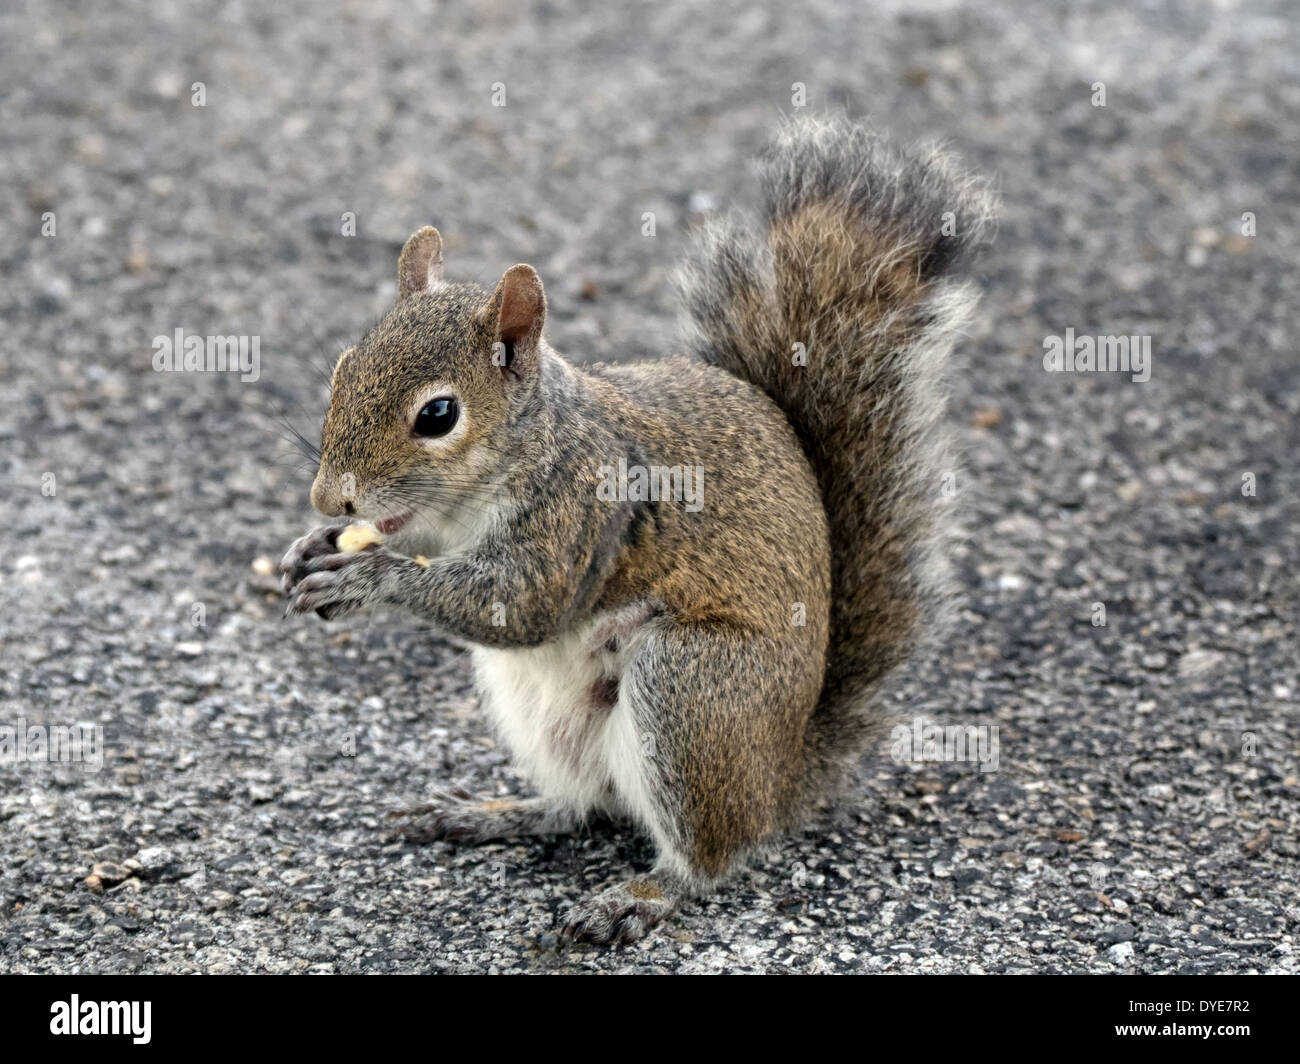 Squirrel snacking on a piece of bread in a parking lot. Stock Photo